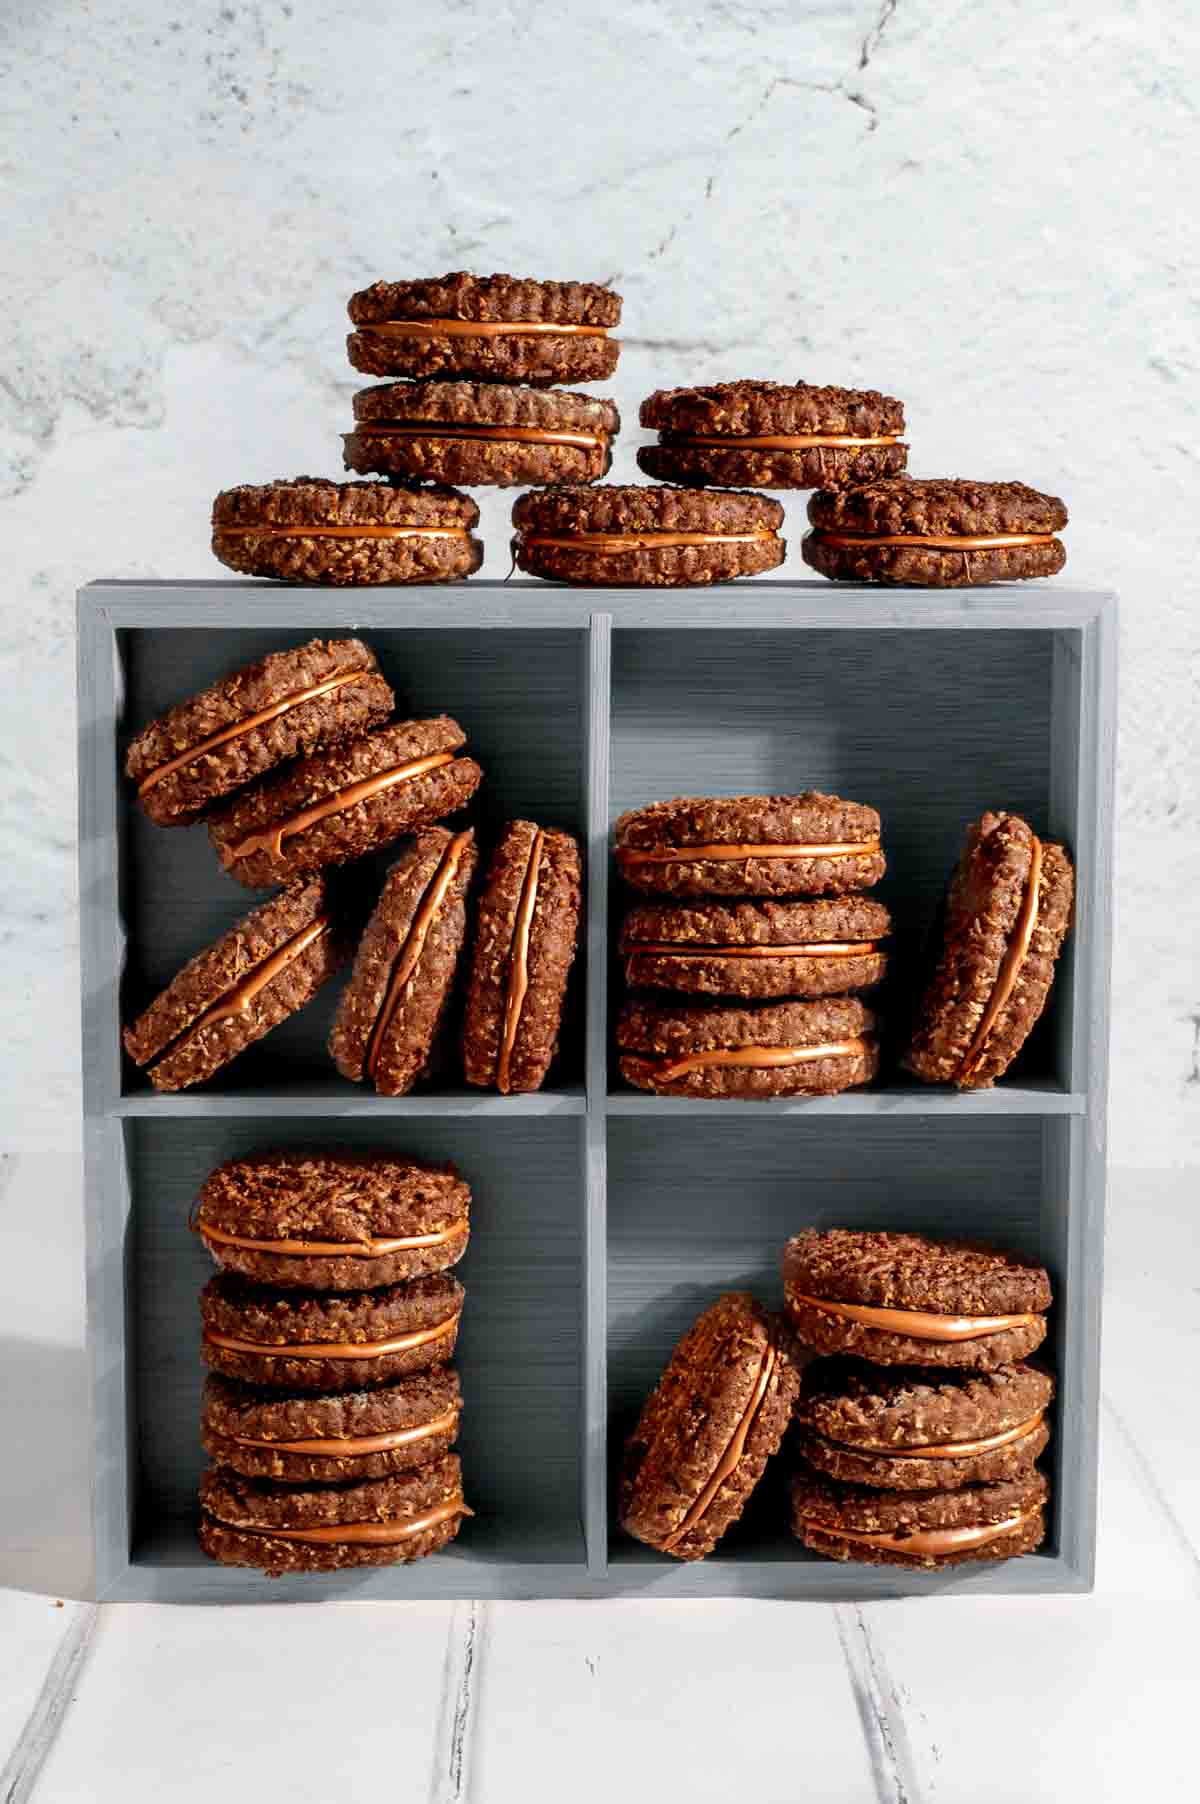 Romany creams stacked on top of each other in an upright wooden box with four compartments.